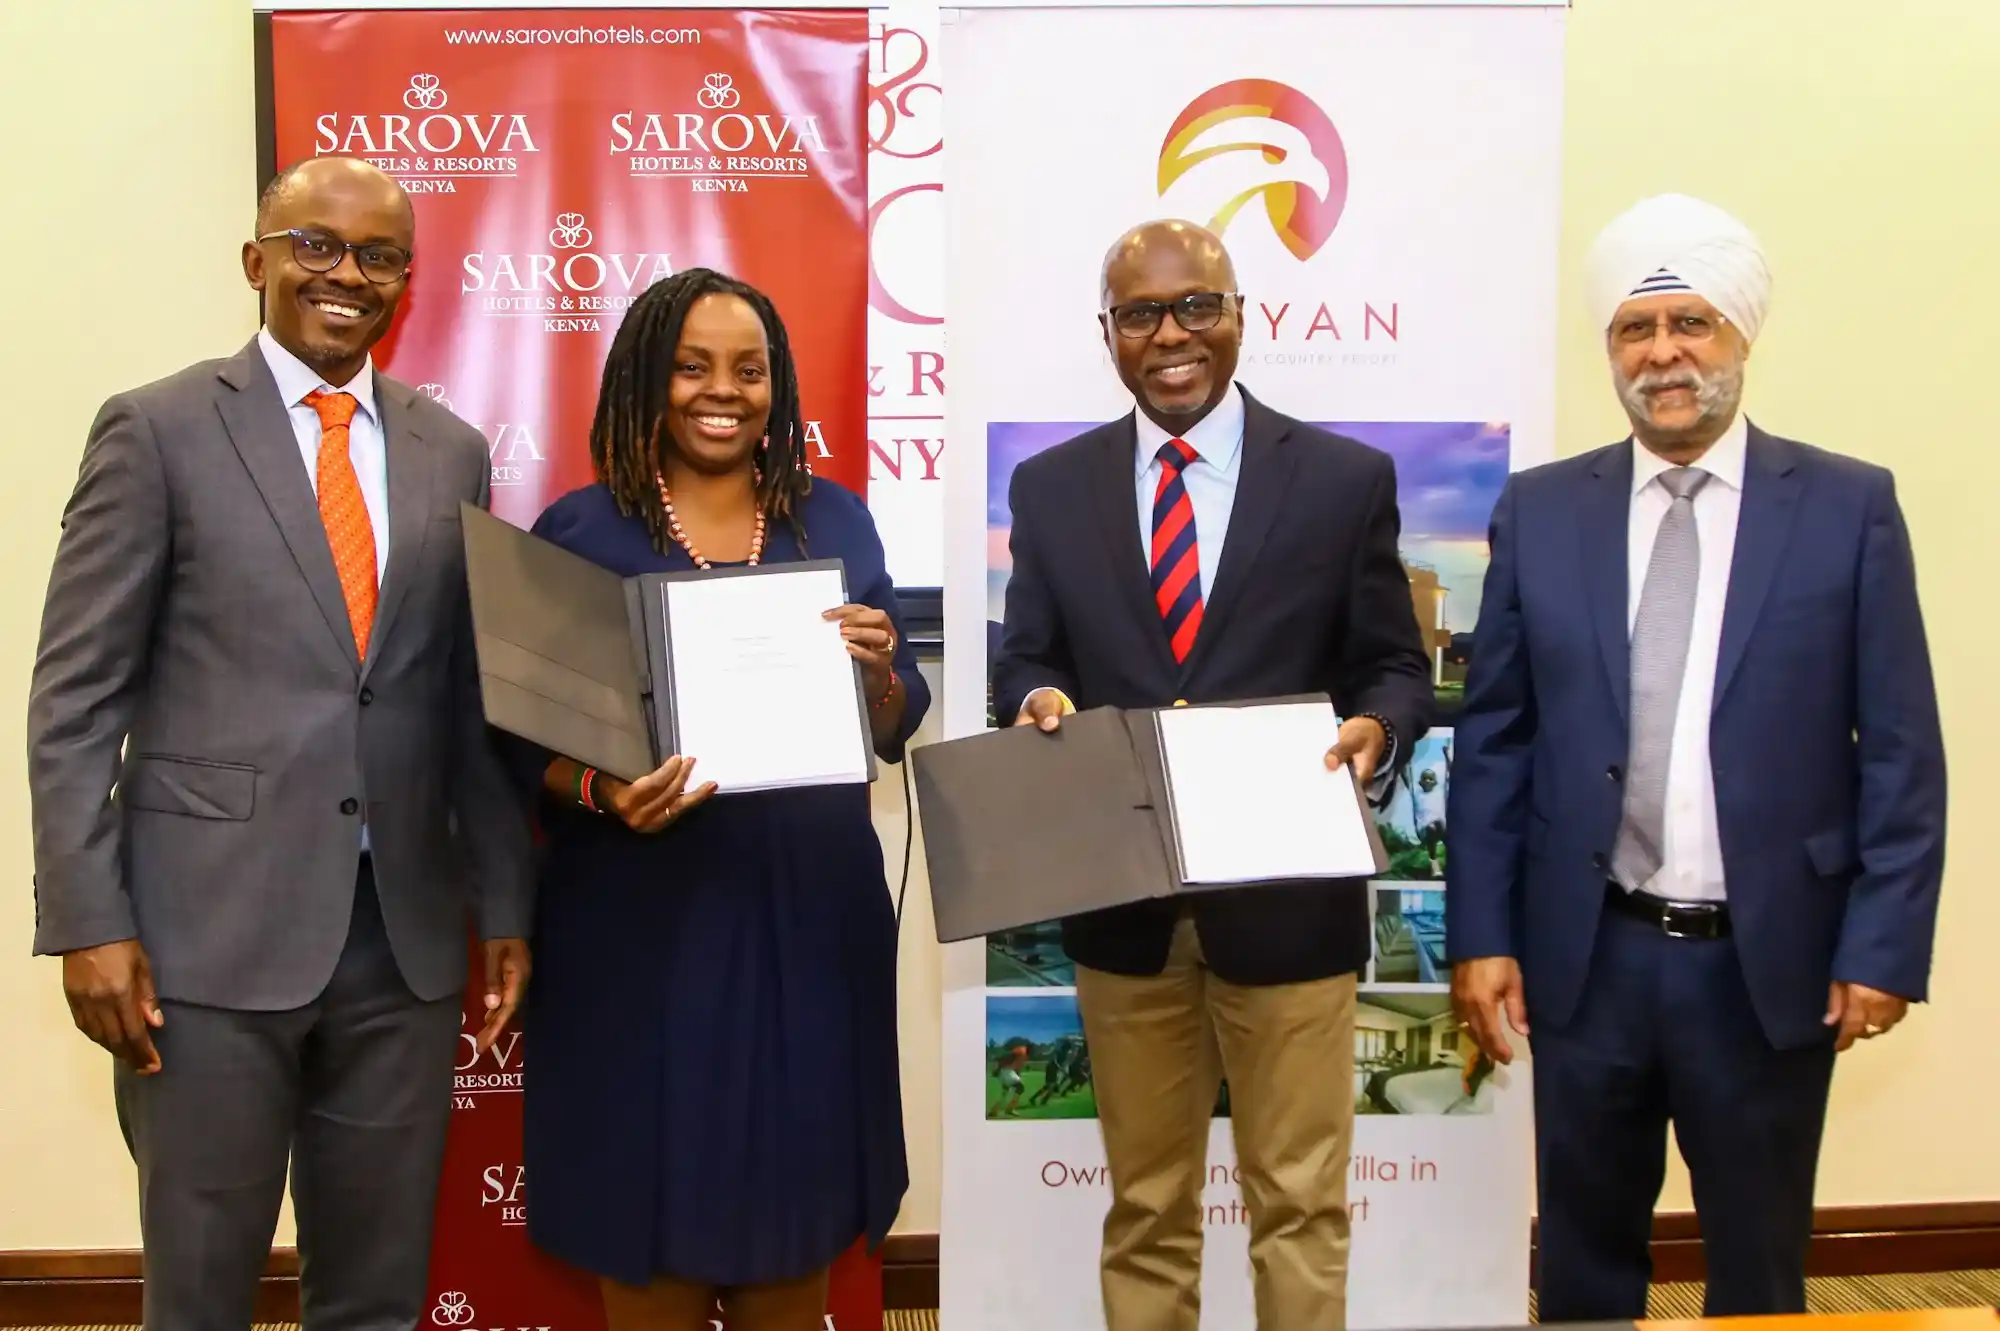 Sarova Hotels Group Managing Director, Jimi Kariuki (second right) and Maiyan Luxury Resort Director Joan Mworia (second left), exchange signed copies of the franchise agreement that will see Maiyan Resort rebranding to Sarova Maiyan Nanyuki, and becoming the ninth hotel under Sarova Hotels Group. Joining the two executives to commemorate the new partnership are Maiyan Luxury Resort Chairman James Mworia (left) and Sarova Hotels Finance Director Jagjit Ahluwalia (right).